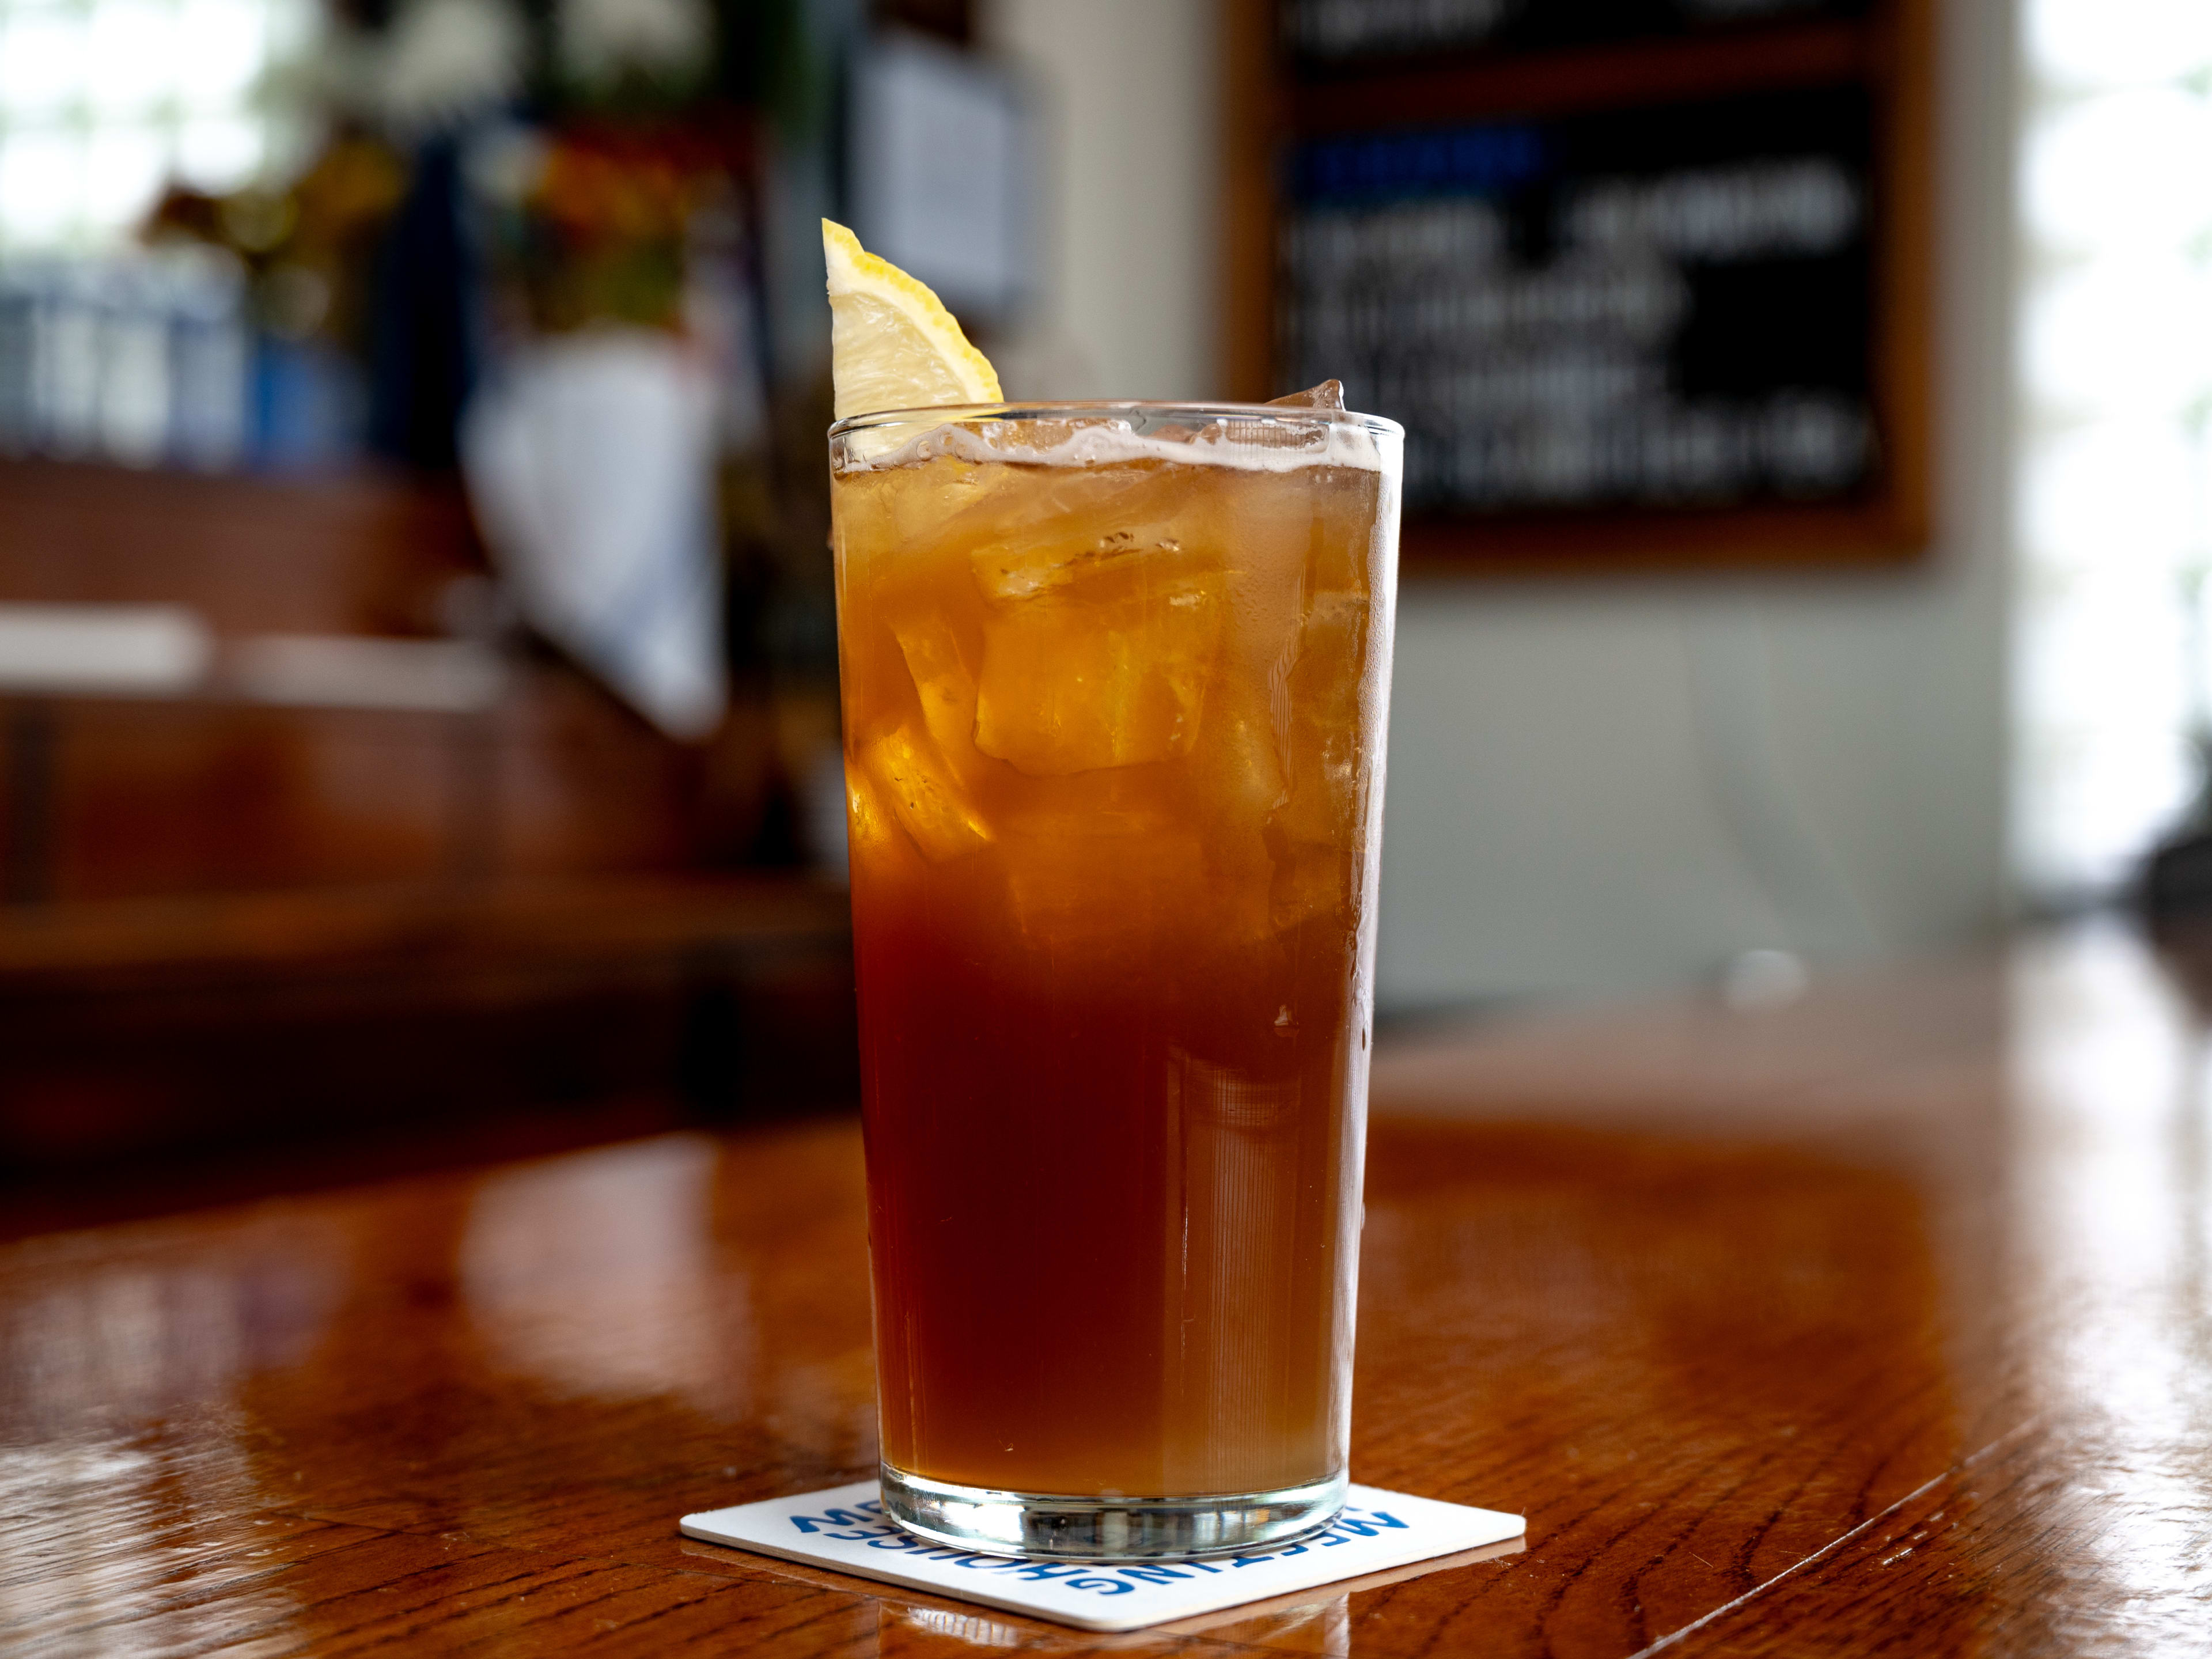 This is a Long Island Iced Tea from Meetinghouse.